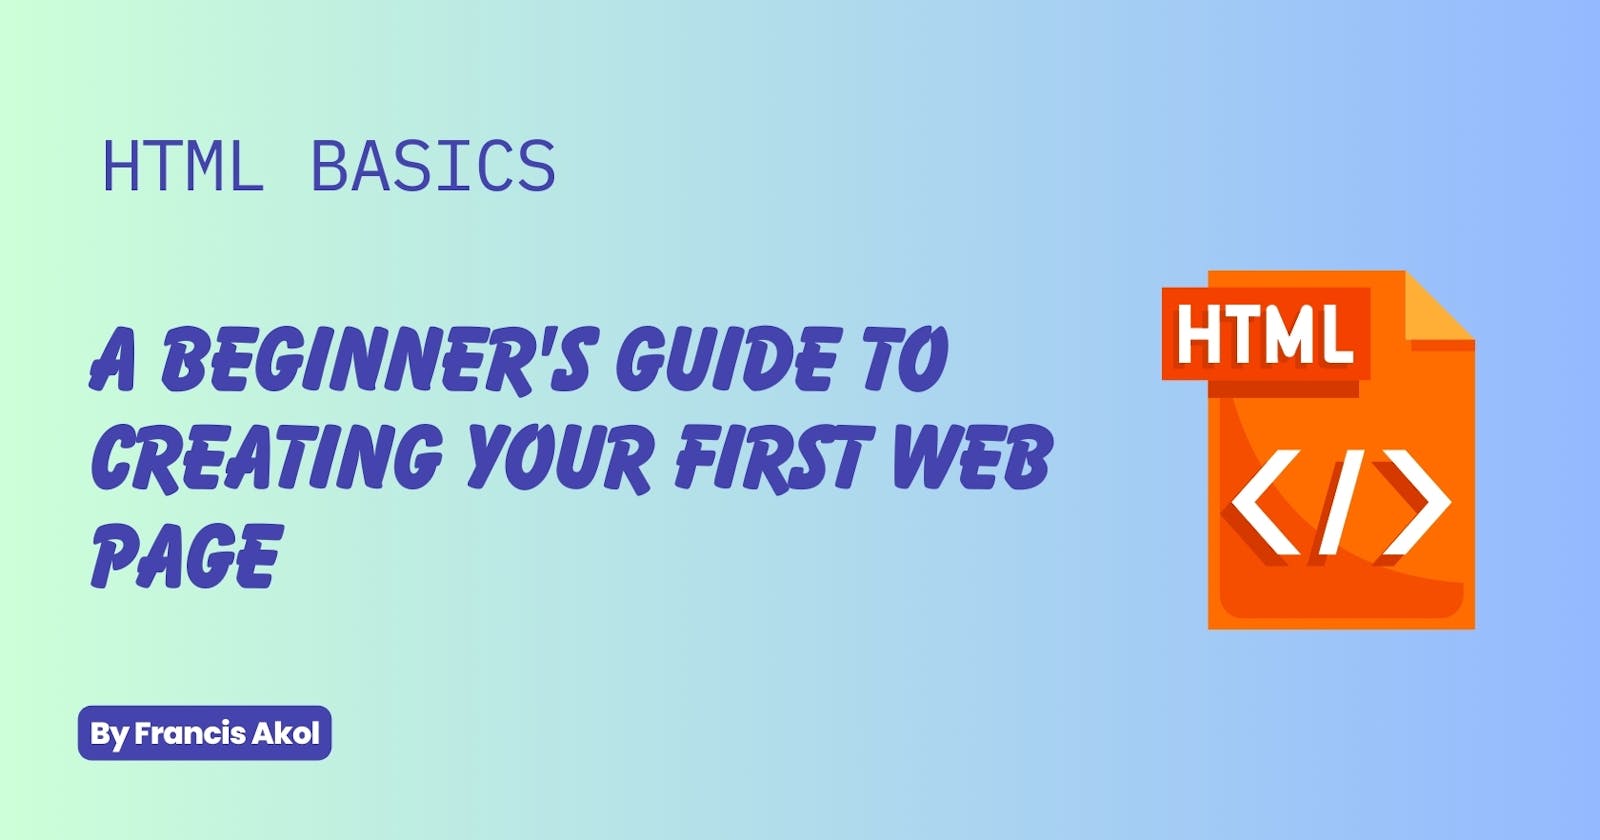 HTML Basics: A Beginner's Guide to Creating Your First Web Page